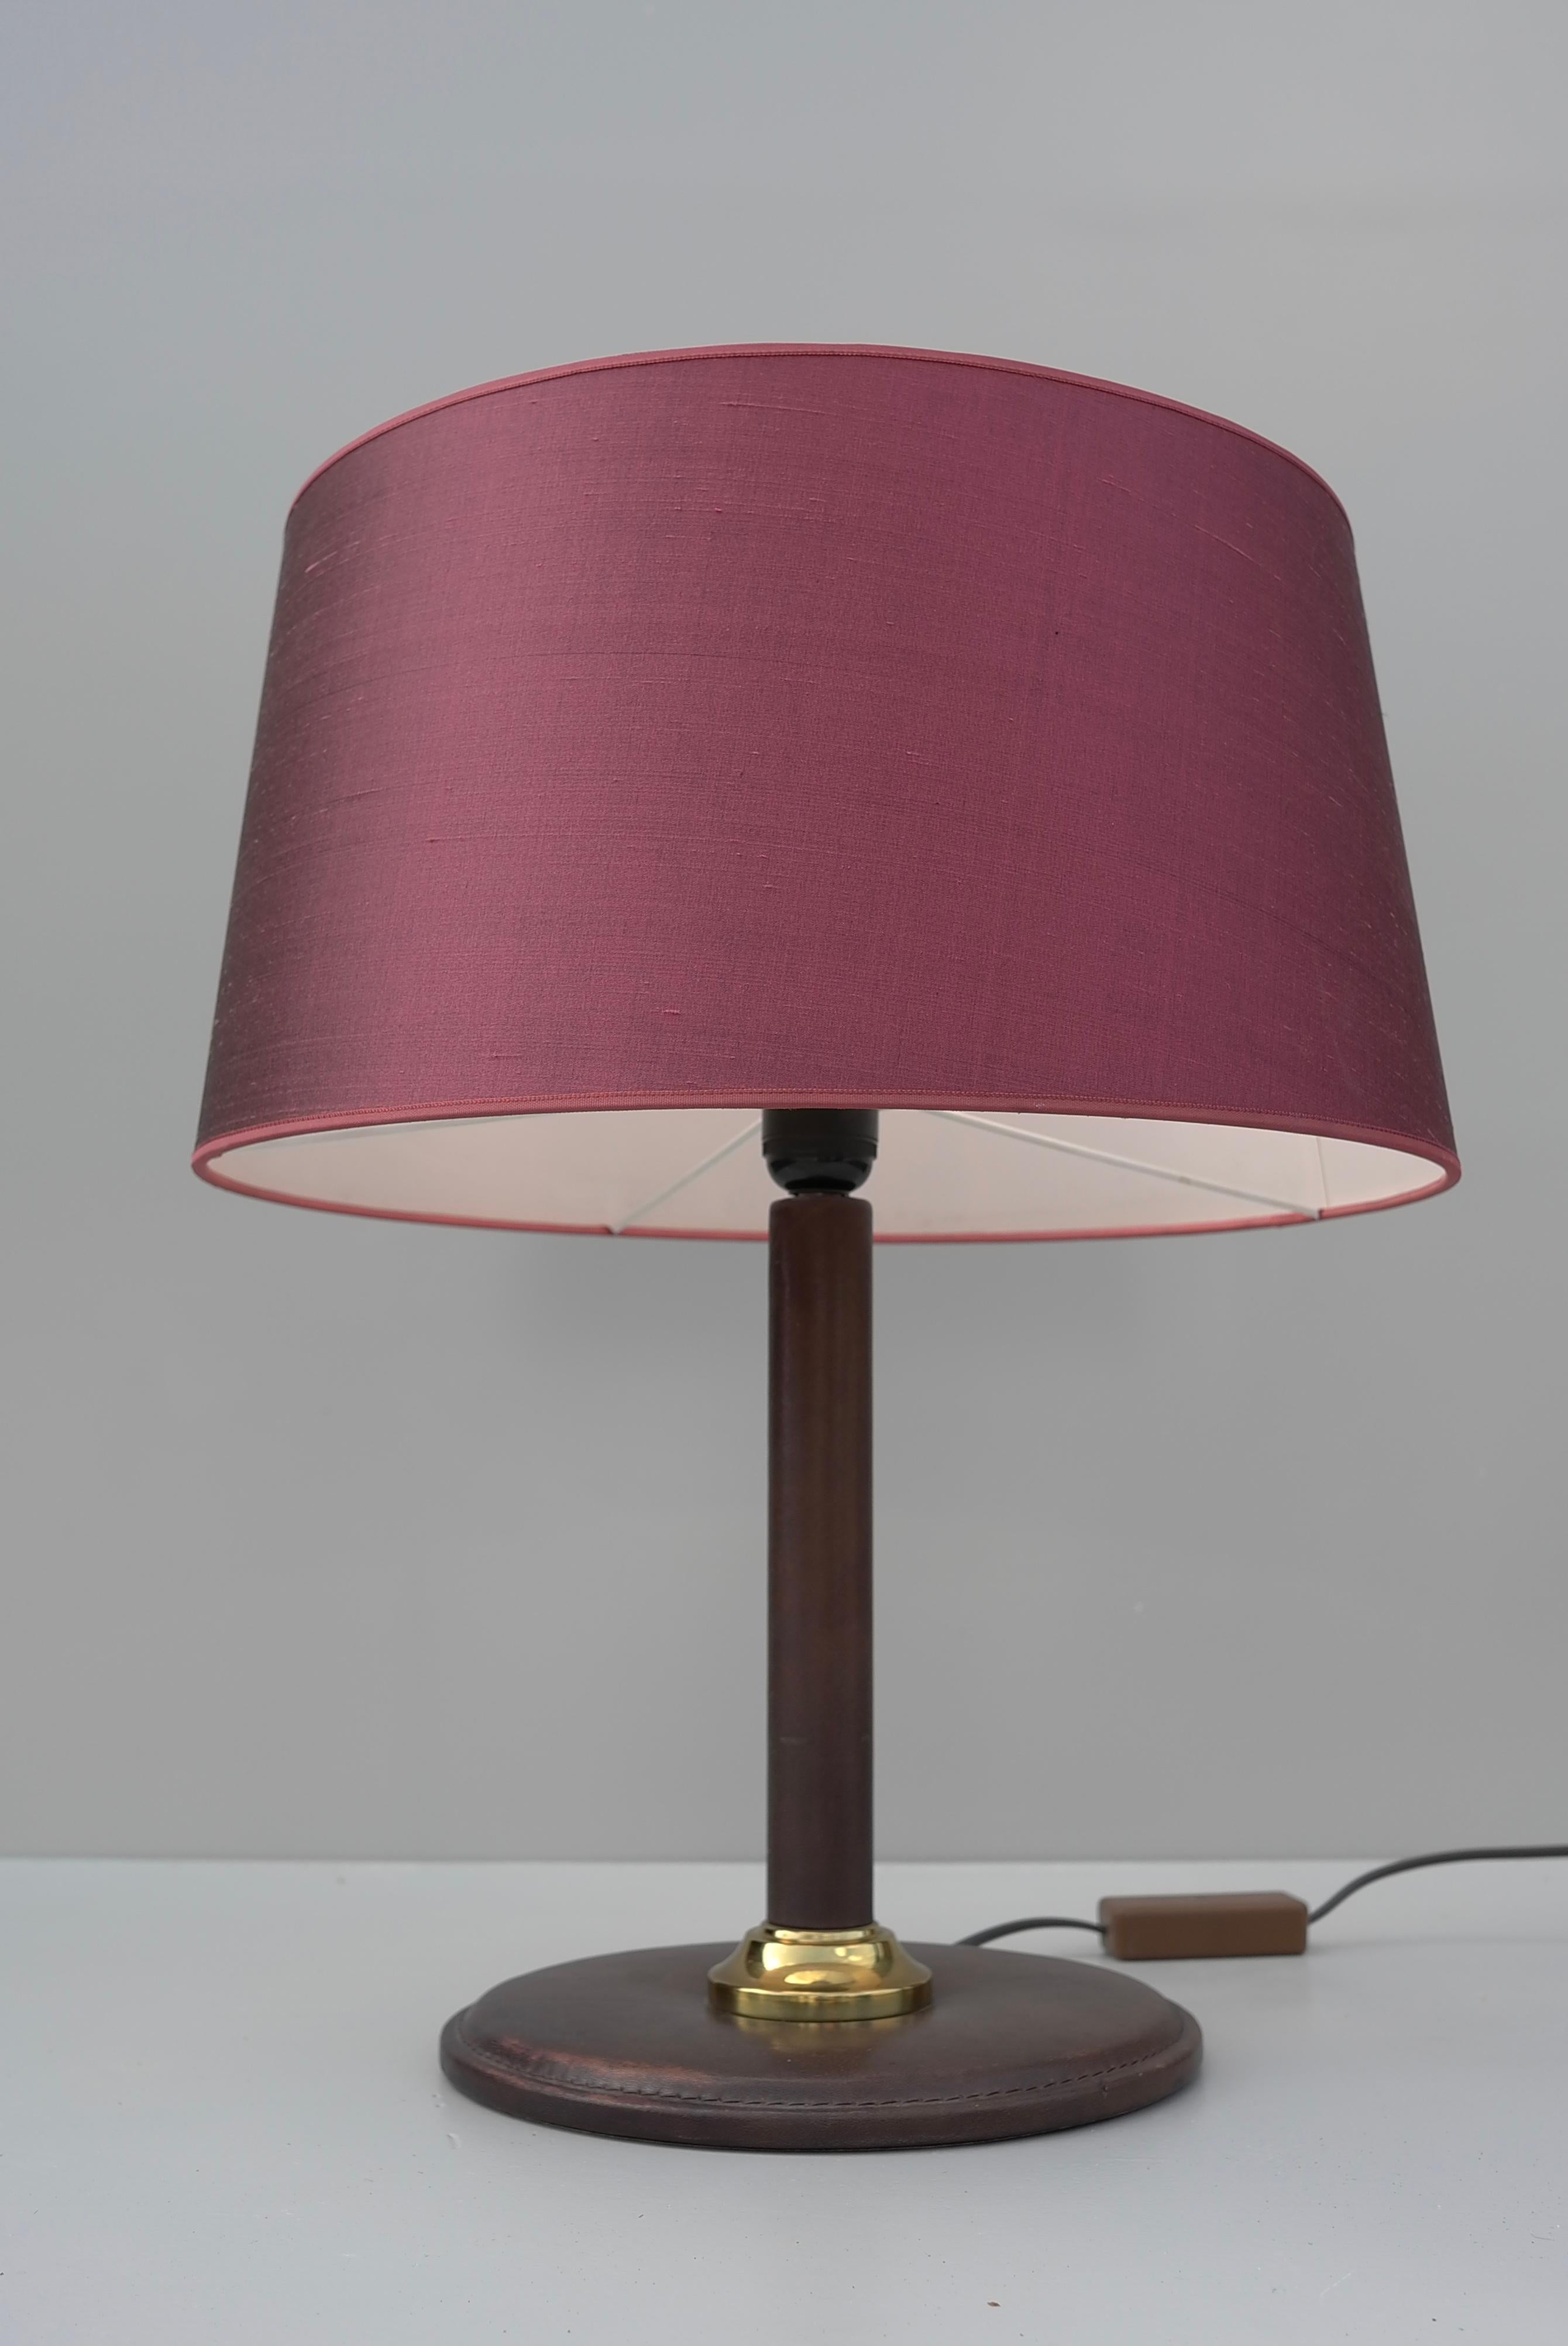 20th Century Hand-Stitched Brown Leather Table Lamp with Silk Deep Pink Shade, France, 1960s For Sale